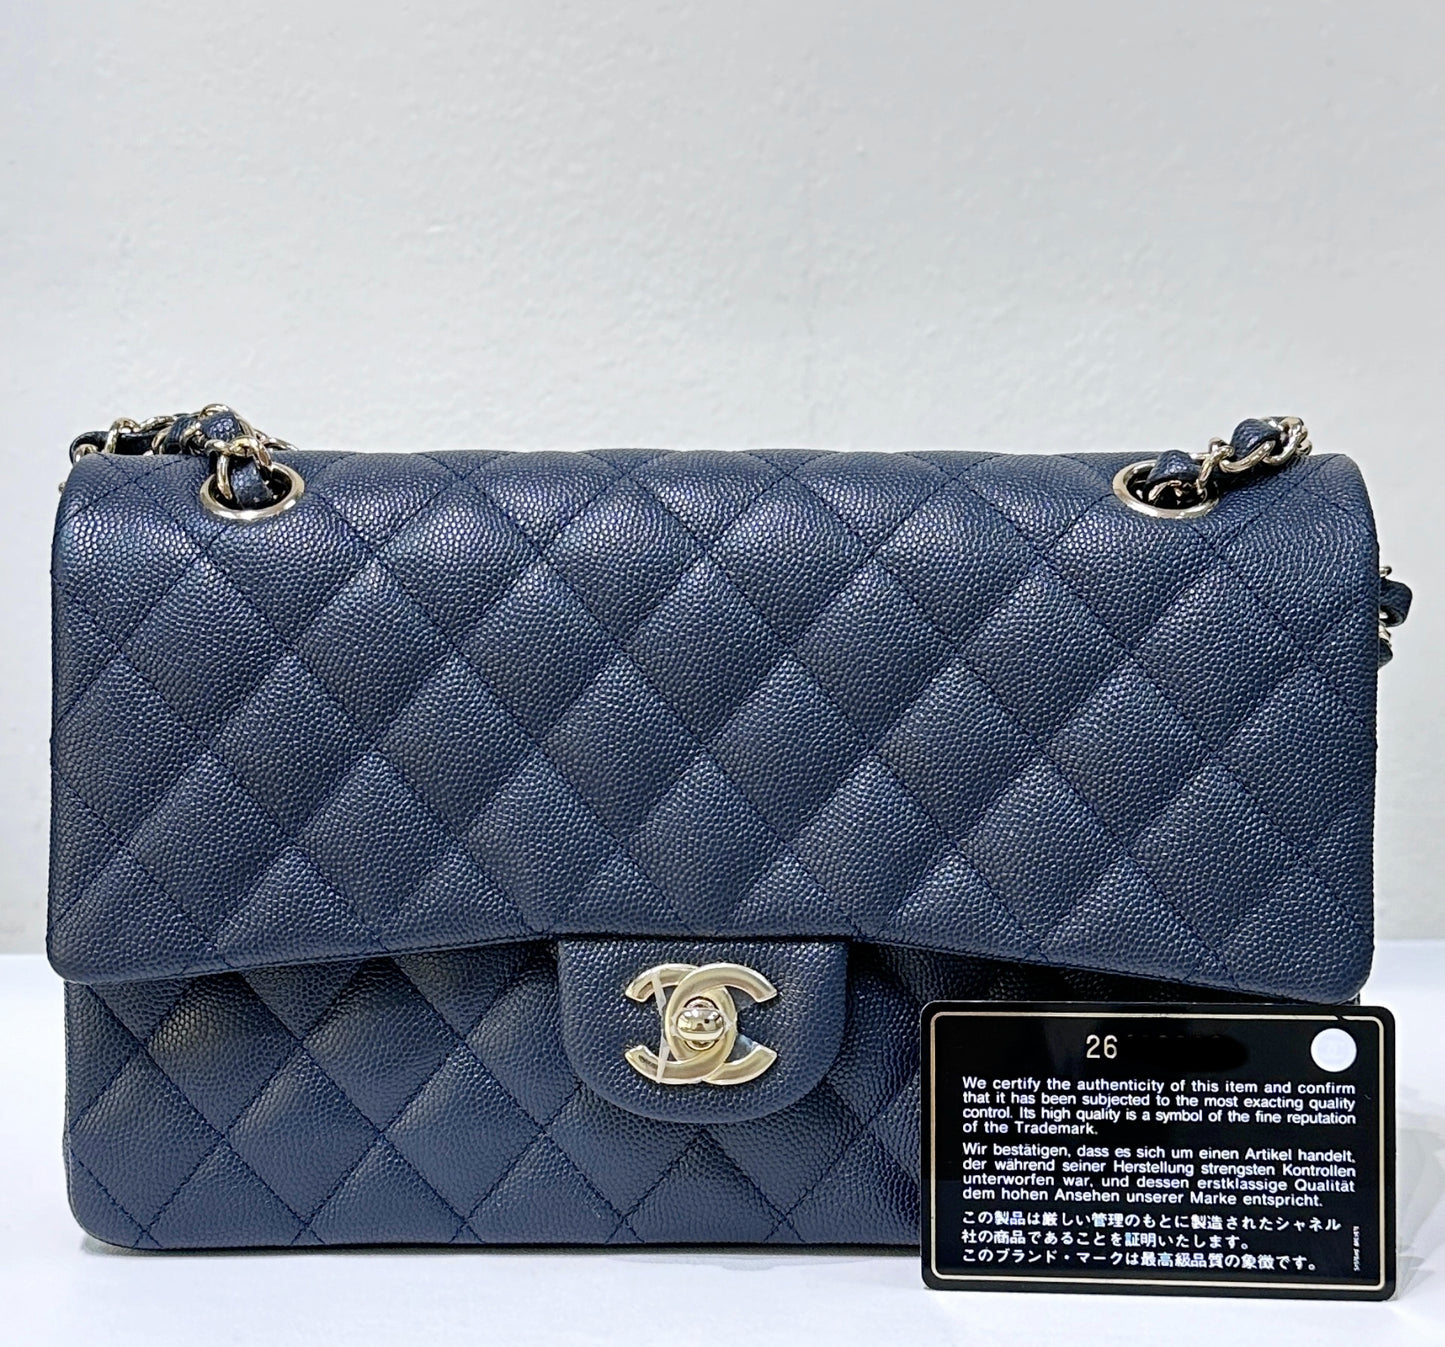 CHANEL Caviar Quilted Medium Double Flap 18B Navy